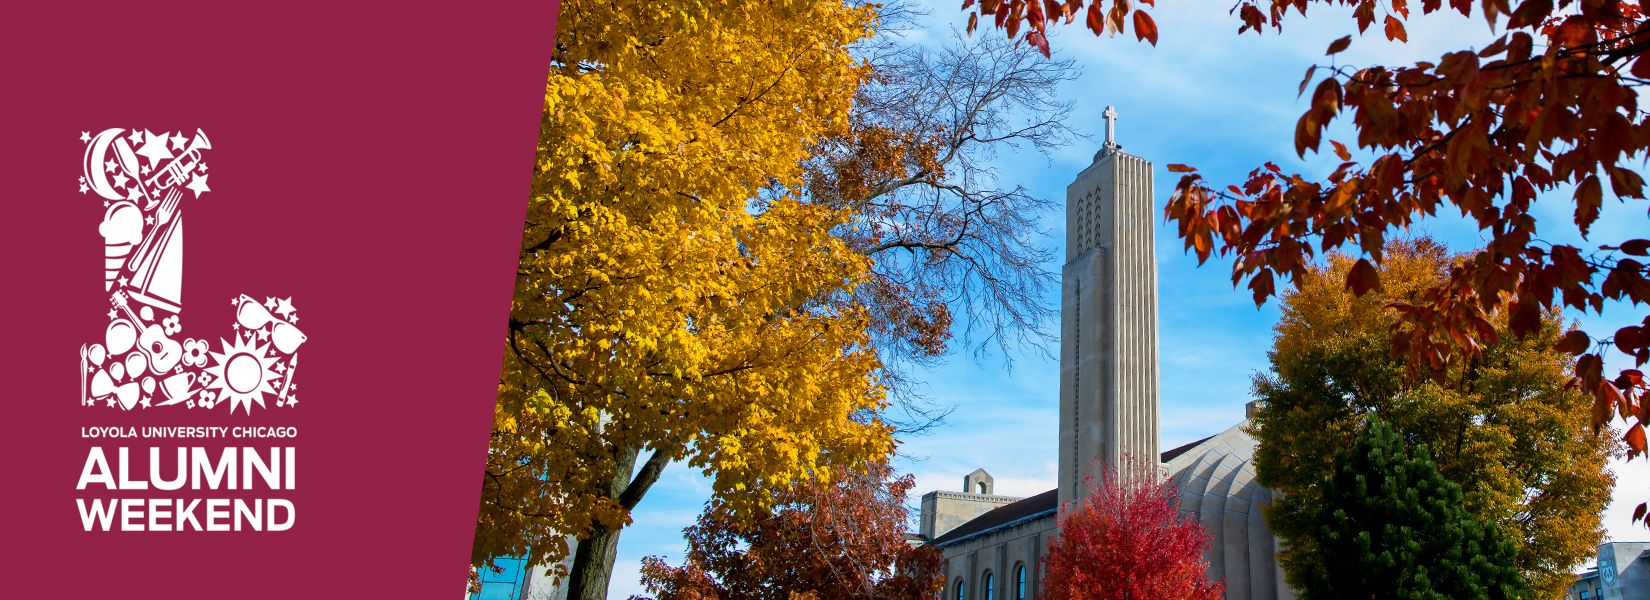 Trees with leaves turned red and gold in autumn surround the Madonna della Strada chapel on the Lakeshore campus. Overlaid text reads Loyola University Chicago Alumni Weekend.